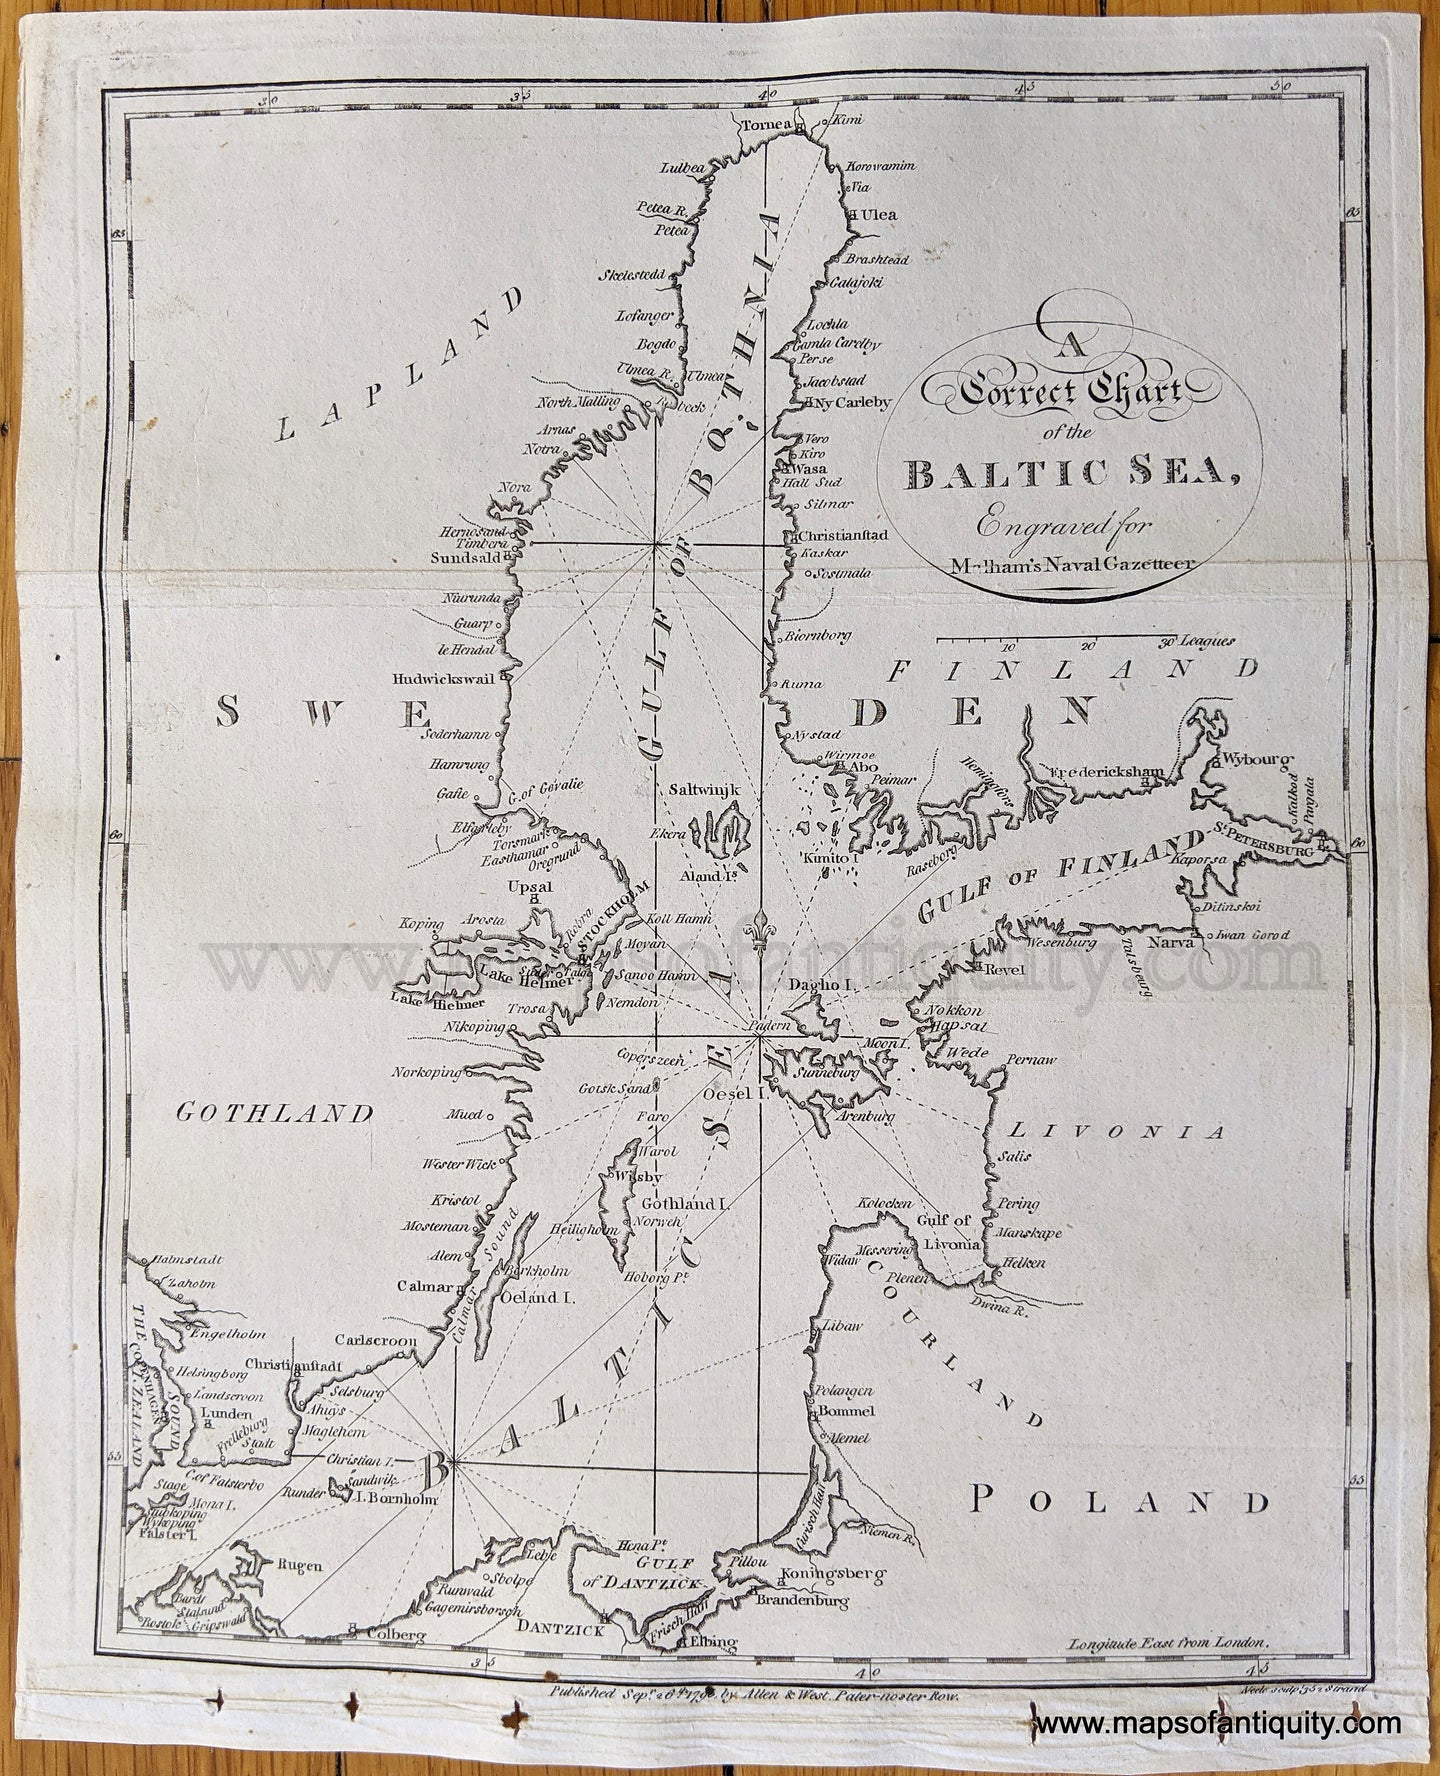 Genuine-Antique-Map-A-Correct-Chart-of-the-Baltic-Sea-Europe--1795-Malham's-Naval-Gazetteer-Maps-Of-Antiquity-1800s-19th-century